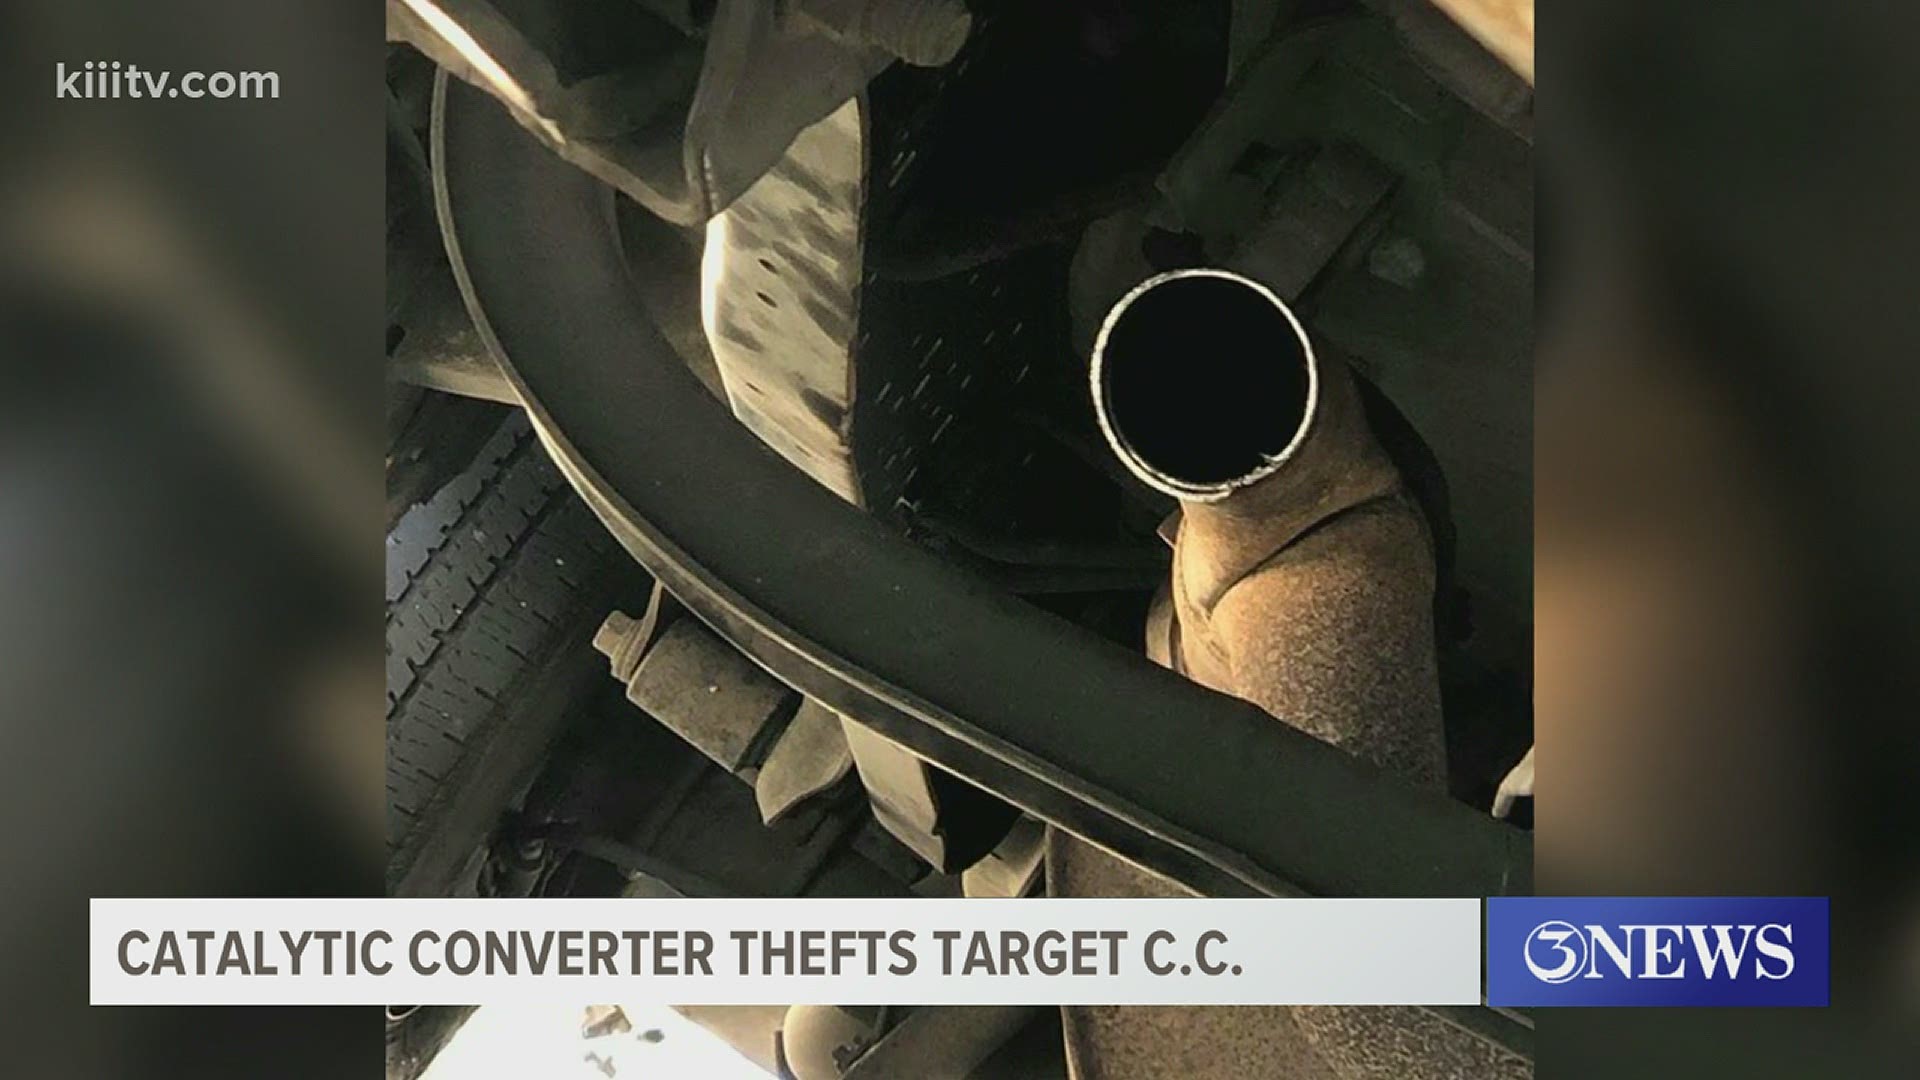 Just how bad is the problem? In 2020, there were 260 converters stolen. This year, there have been 312 stolen.